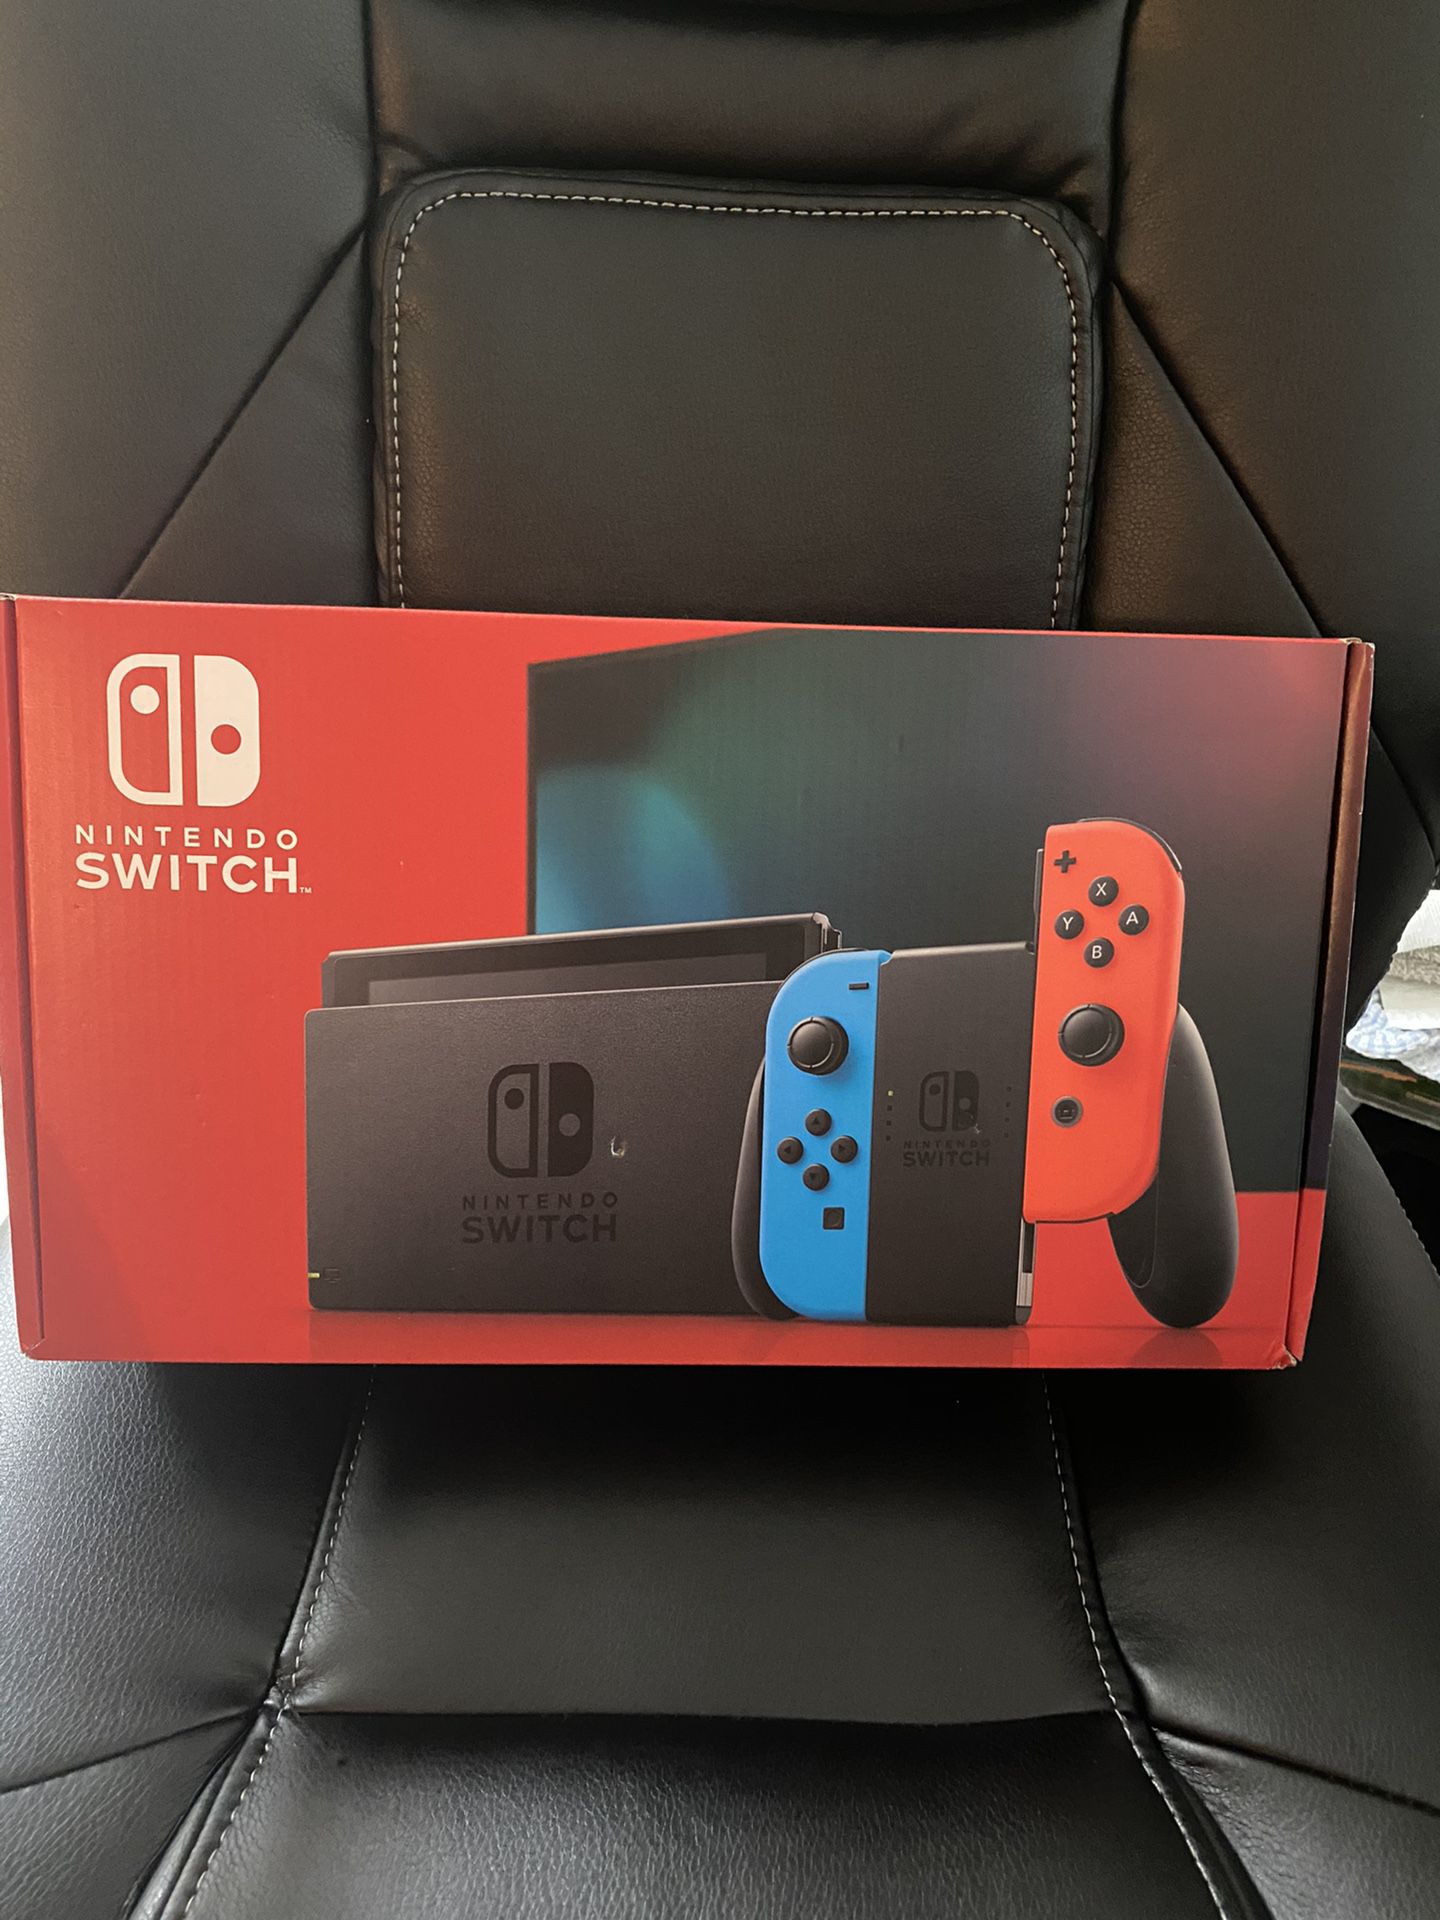 Brand new Nintendo Switch!!! Never used! Has never been open!! $380 no trades!!